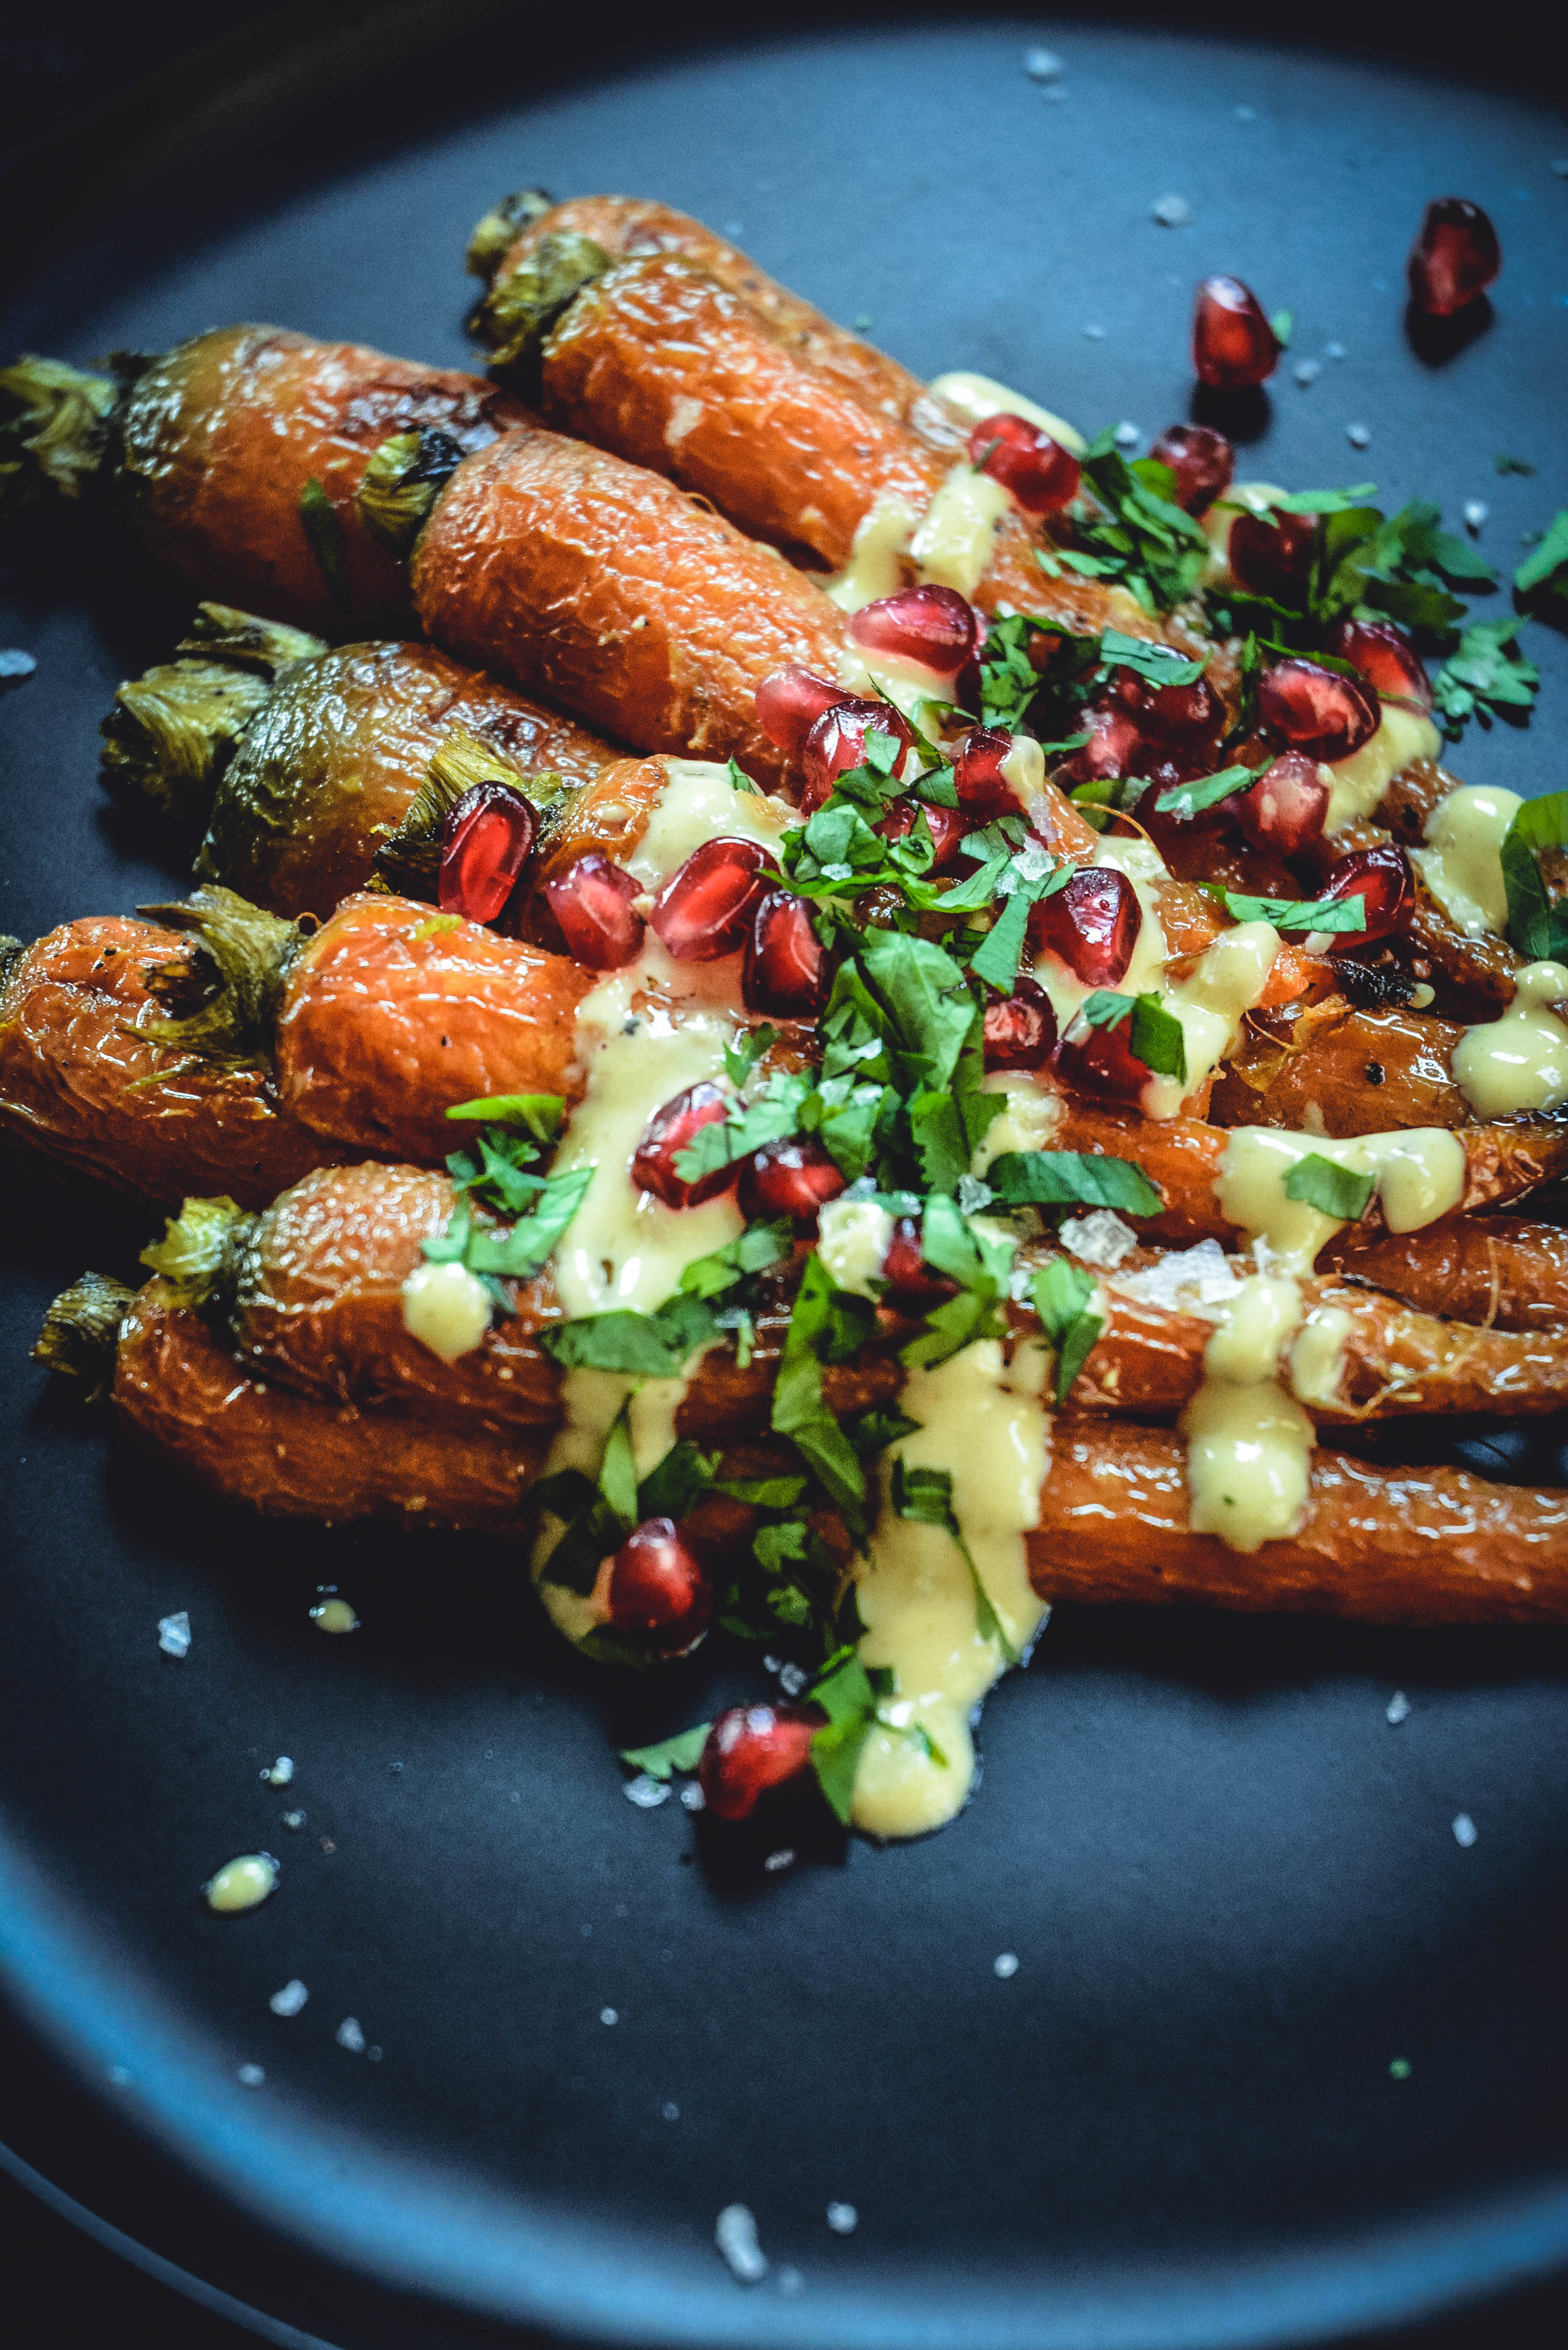 Roasted Carrots With A Simple Orange Tahini Sauce And Pomegranate on black plate - side view